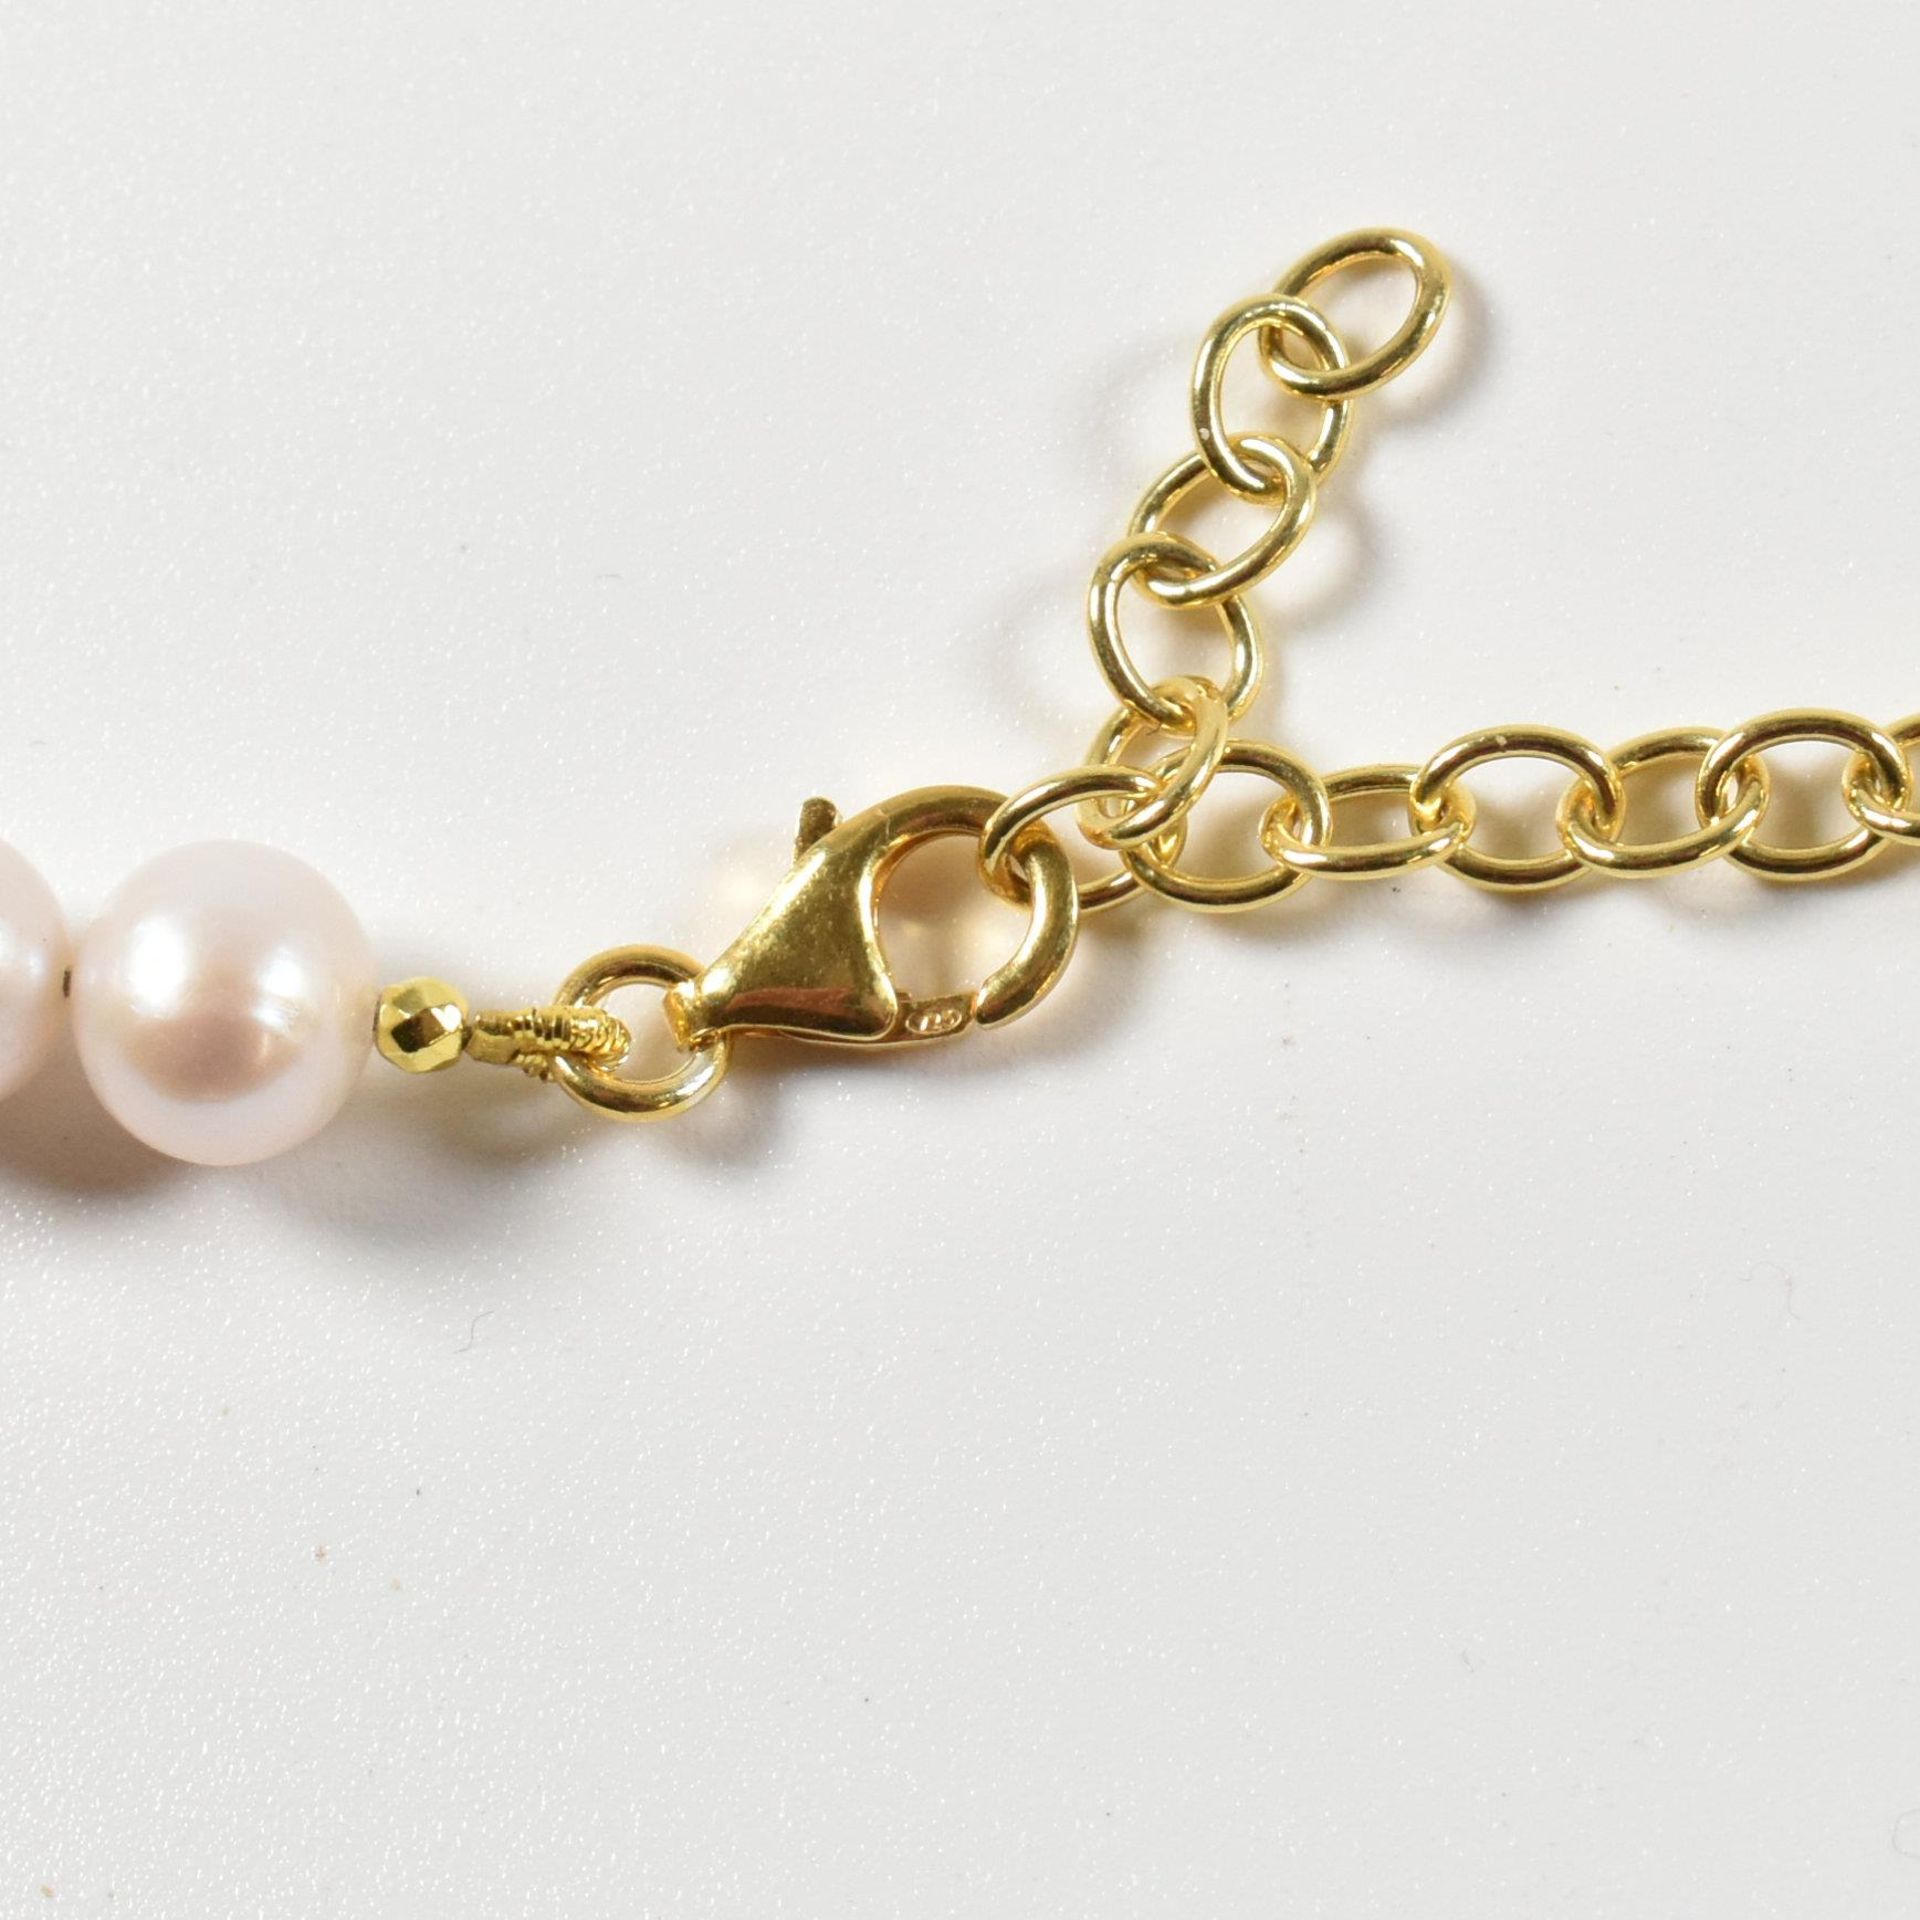 FRESHWATER PEARL & RUBY DROP PENDANT NECKLACE - Image 3 of 7